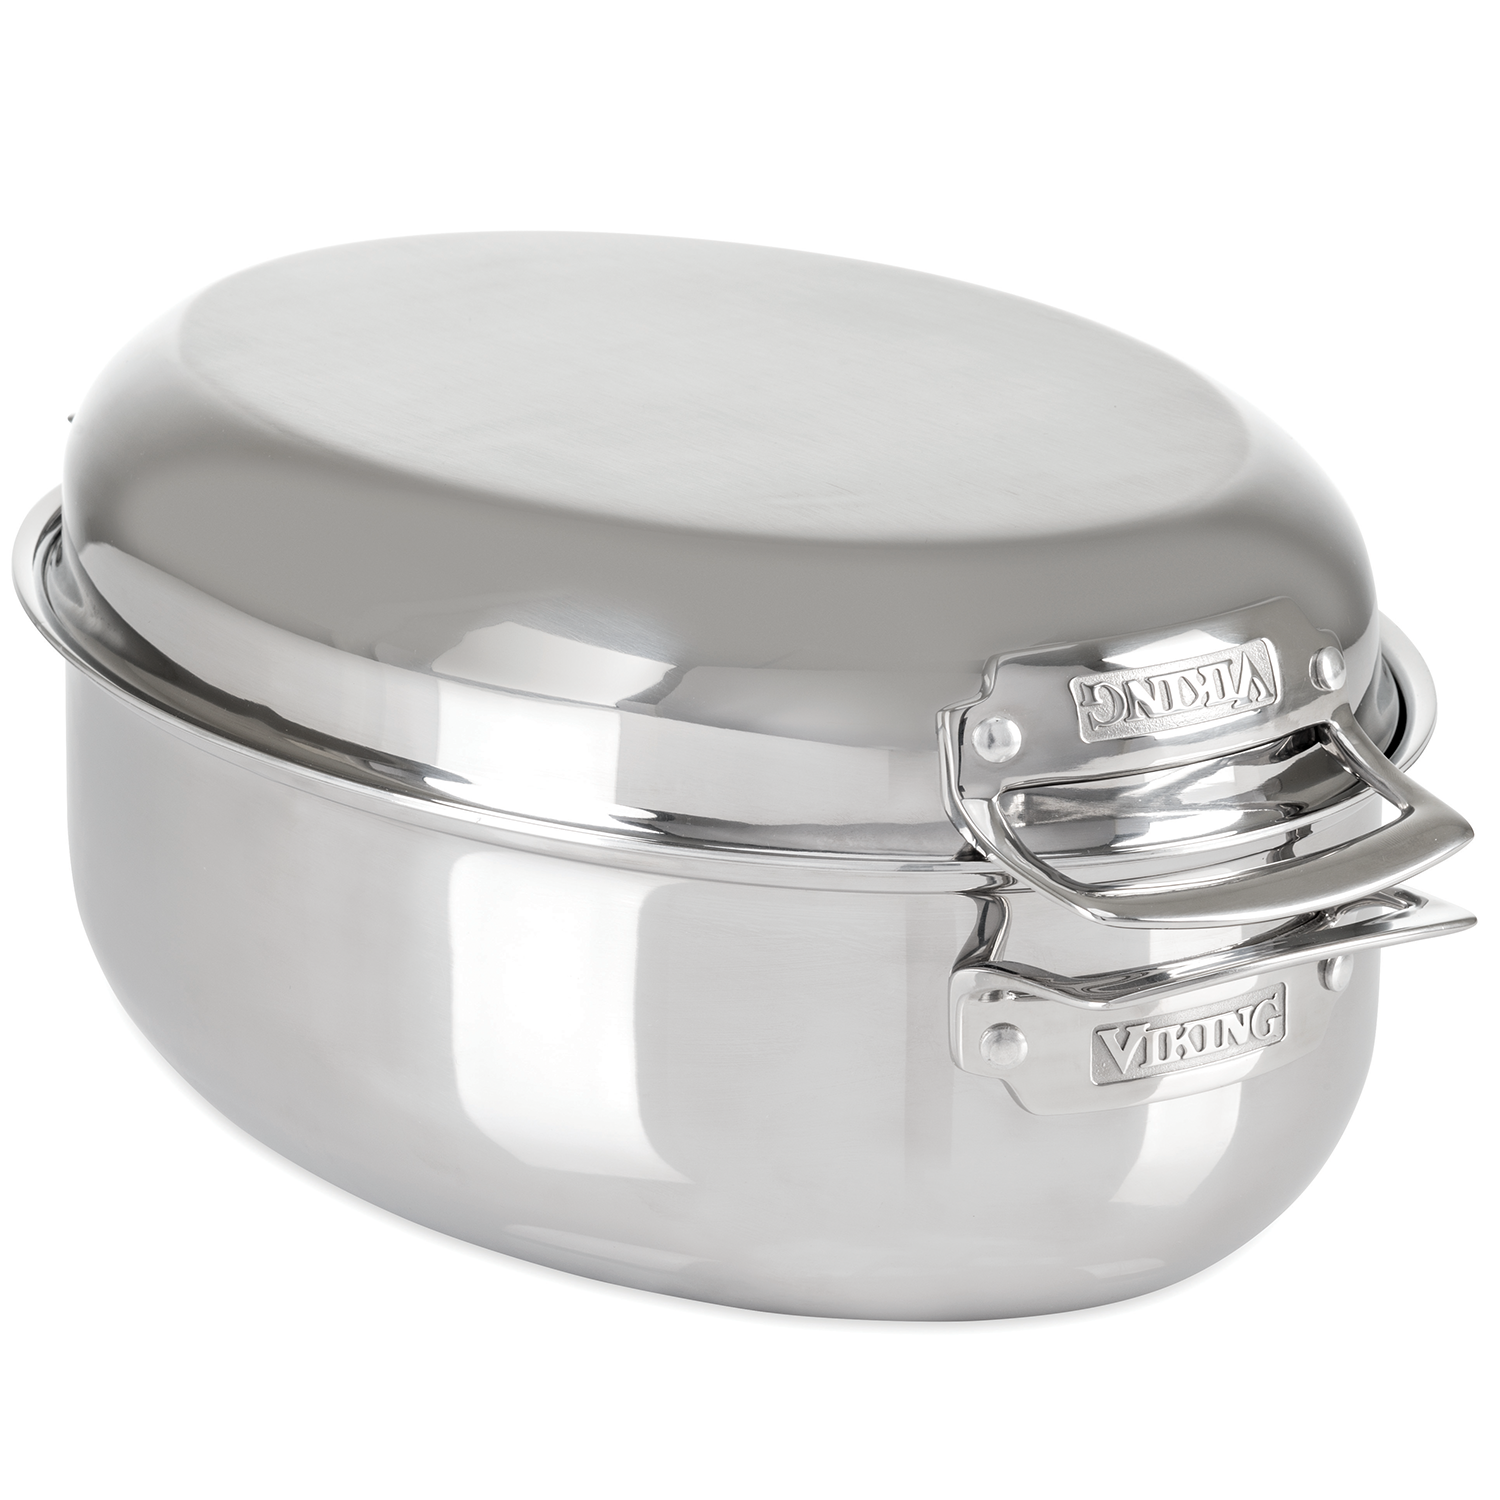 Viking 3-Ply Stainless Steel 12-Quart Stock Pot with Metal Lid